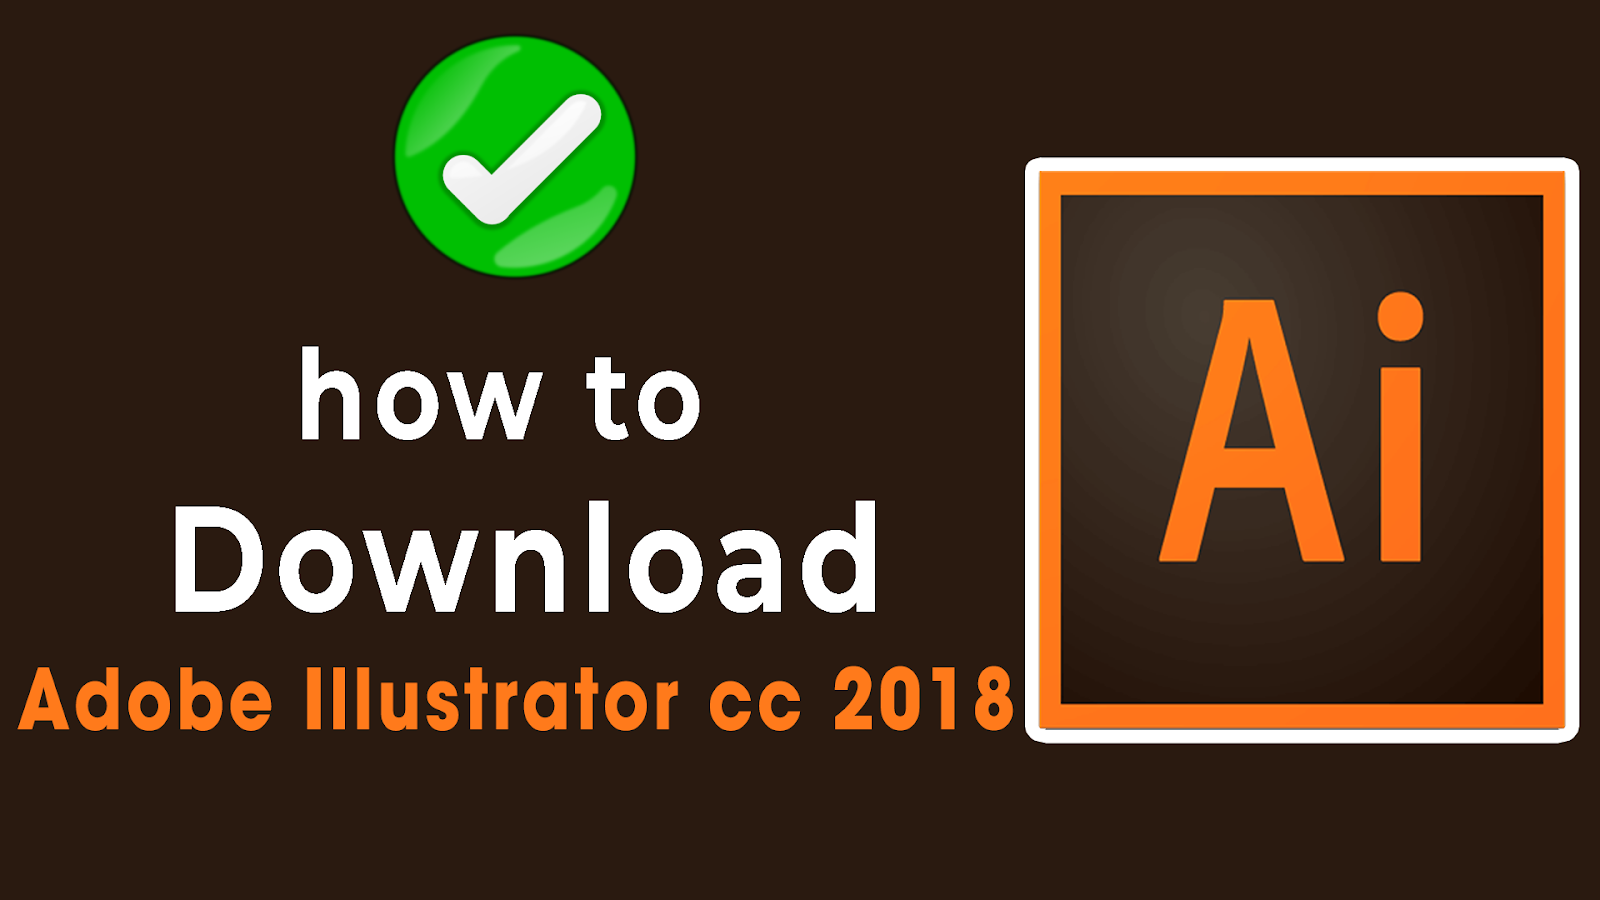 how to download adobe illustrator 2018 instead of 2019